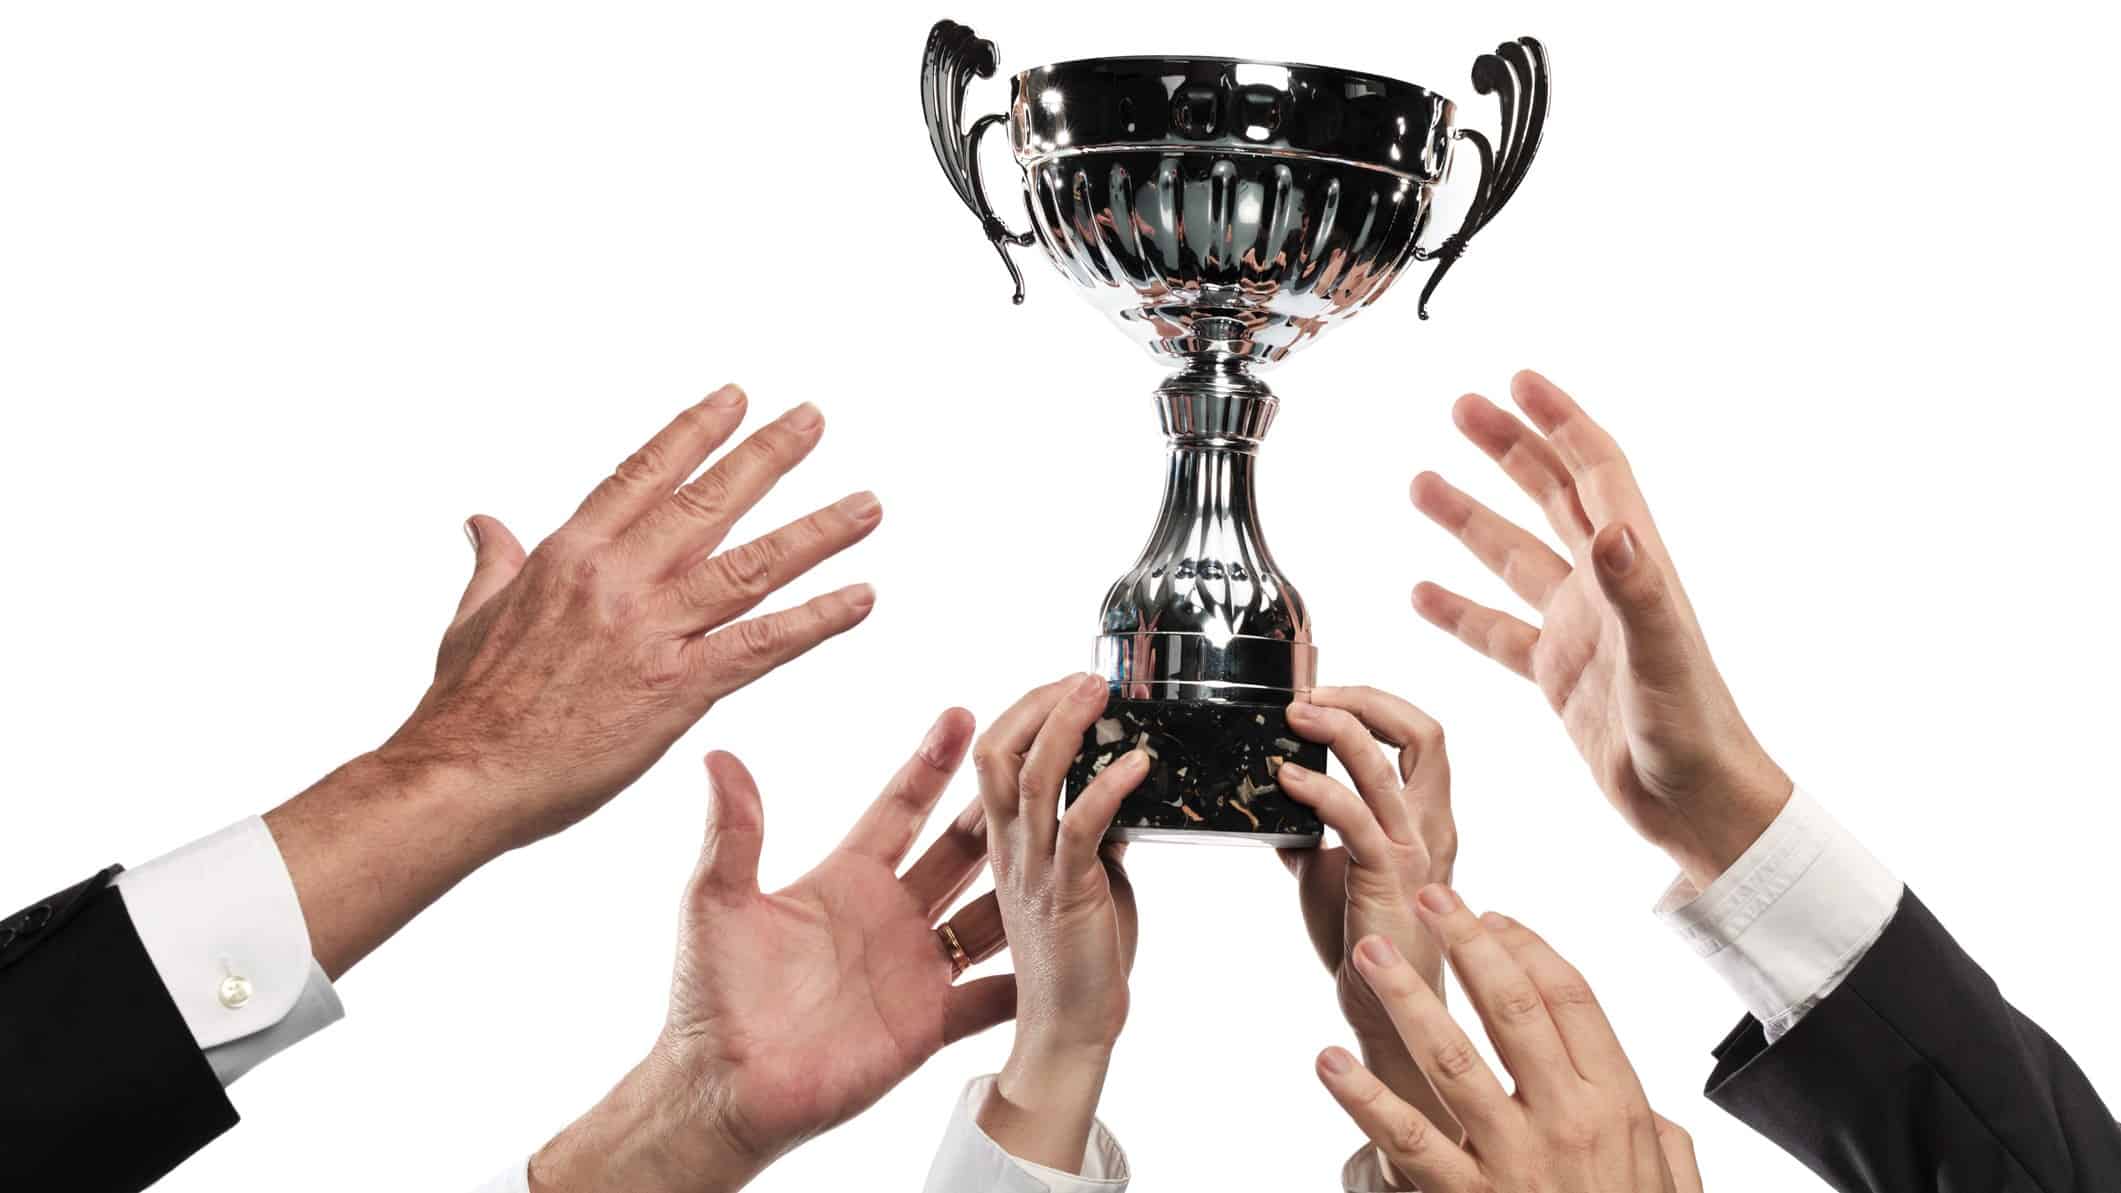 Rival hands reaching upward for a company trophy or prize.